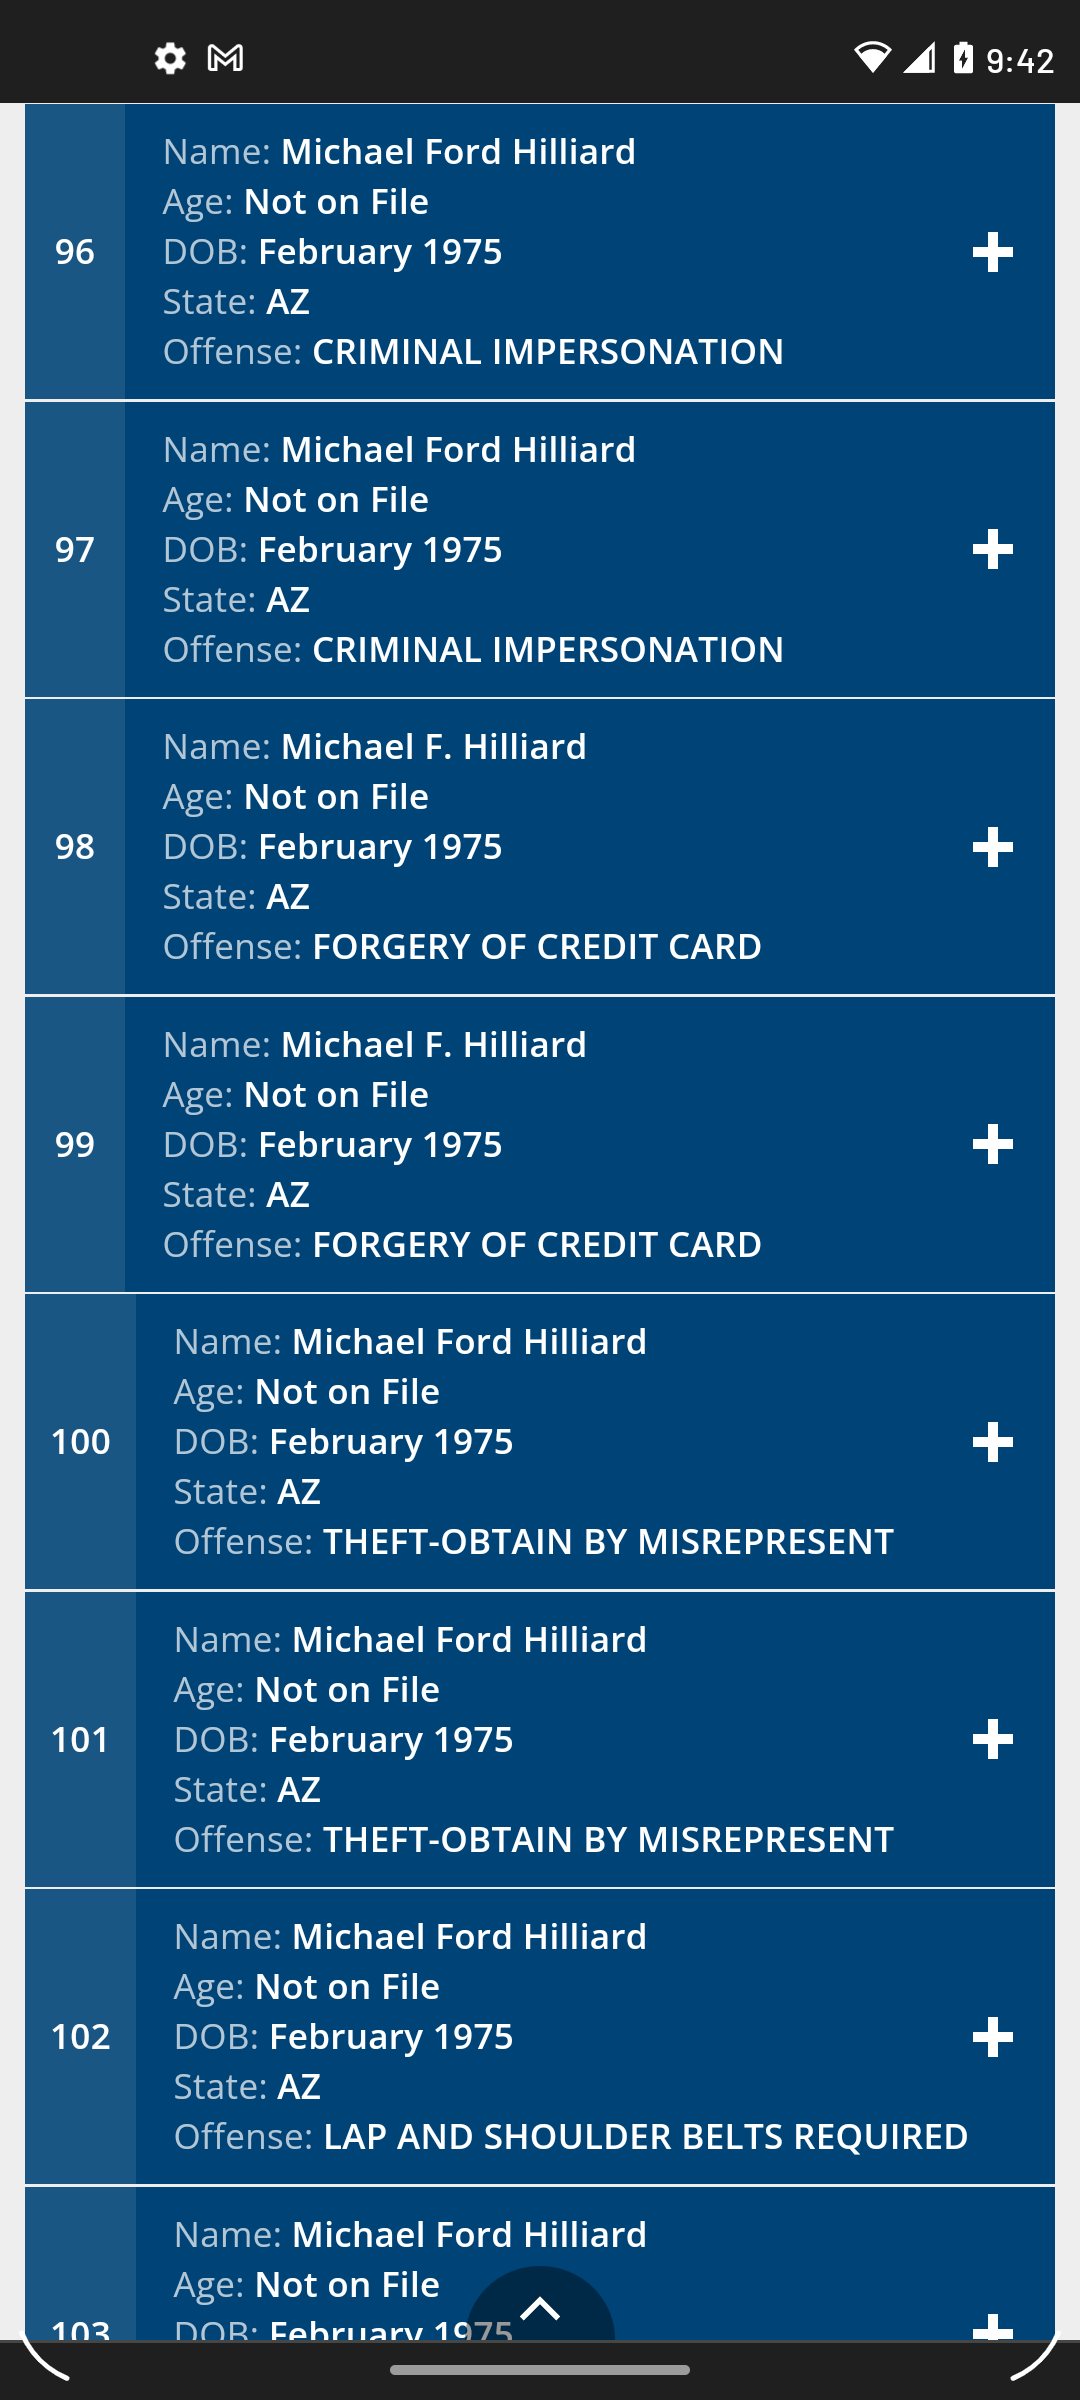 Michael Hilliard is a known scam artist